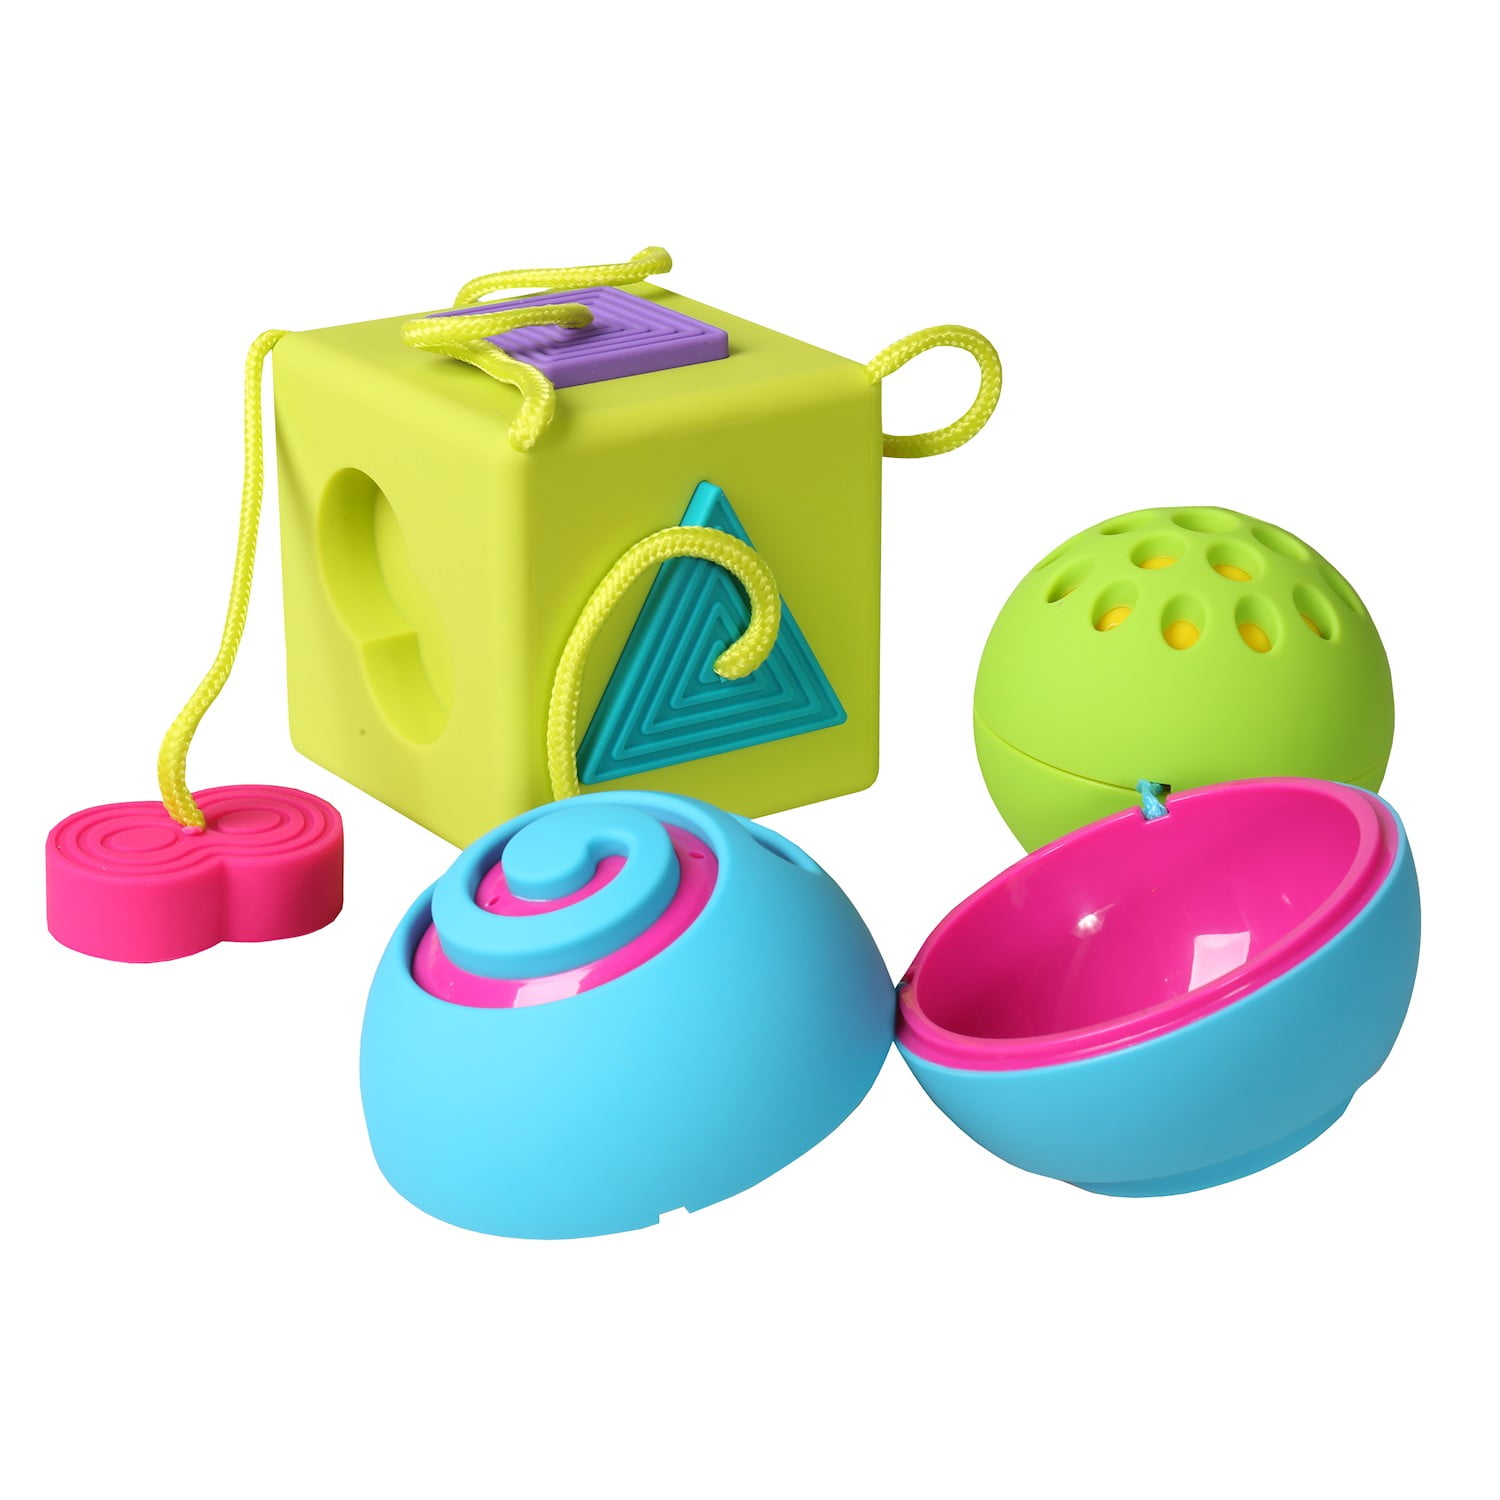 Fat Brain Toys Oombee Bundle - Nesting Ball and Oombee Cube Shape Sorter  Combo, 2 PC BPA-Free Baby Toy Set, Includes Zippered Storage Bag 